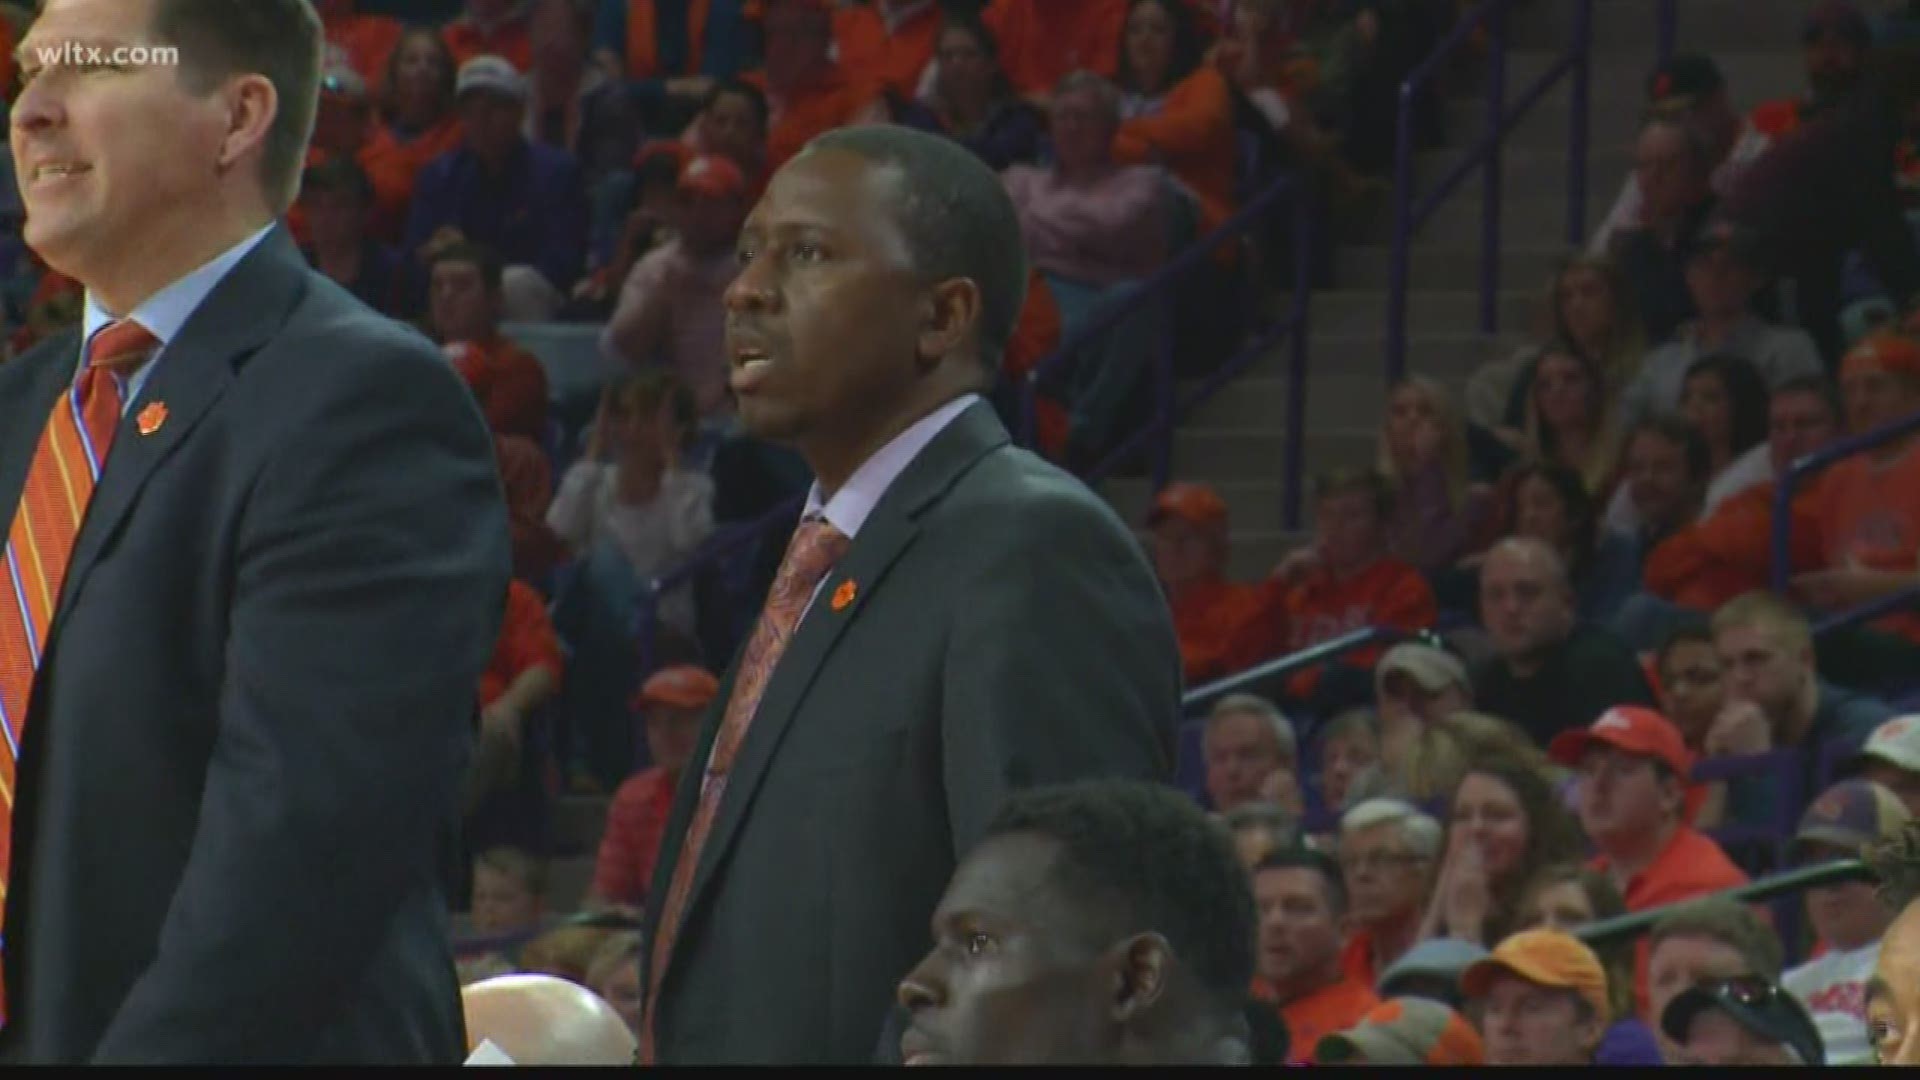 After seven years as one of Brad Brownell's assistant coaches, Steve Smith is out after his name and voice surfaced as part of the FBI investigation into corruption in college basketball.